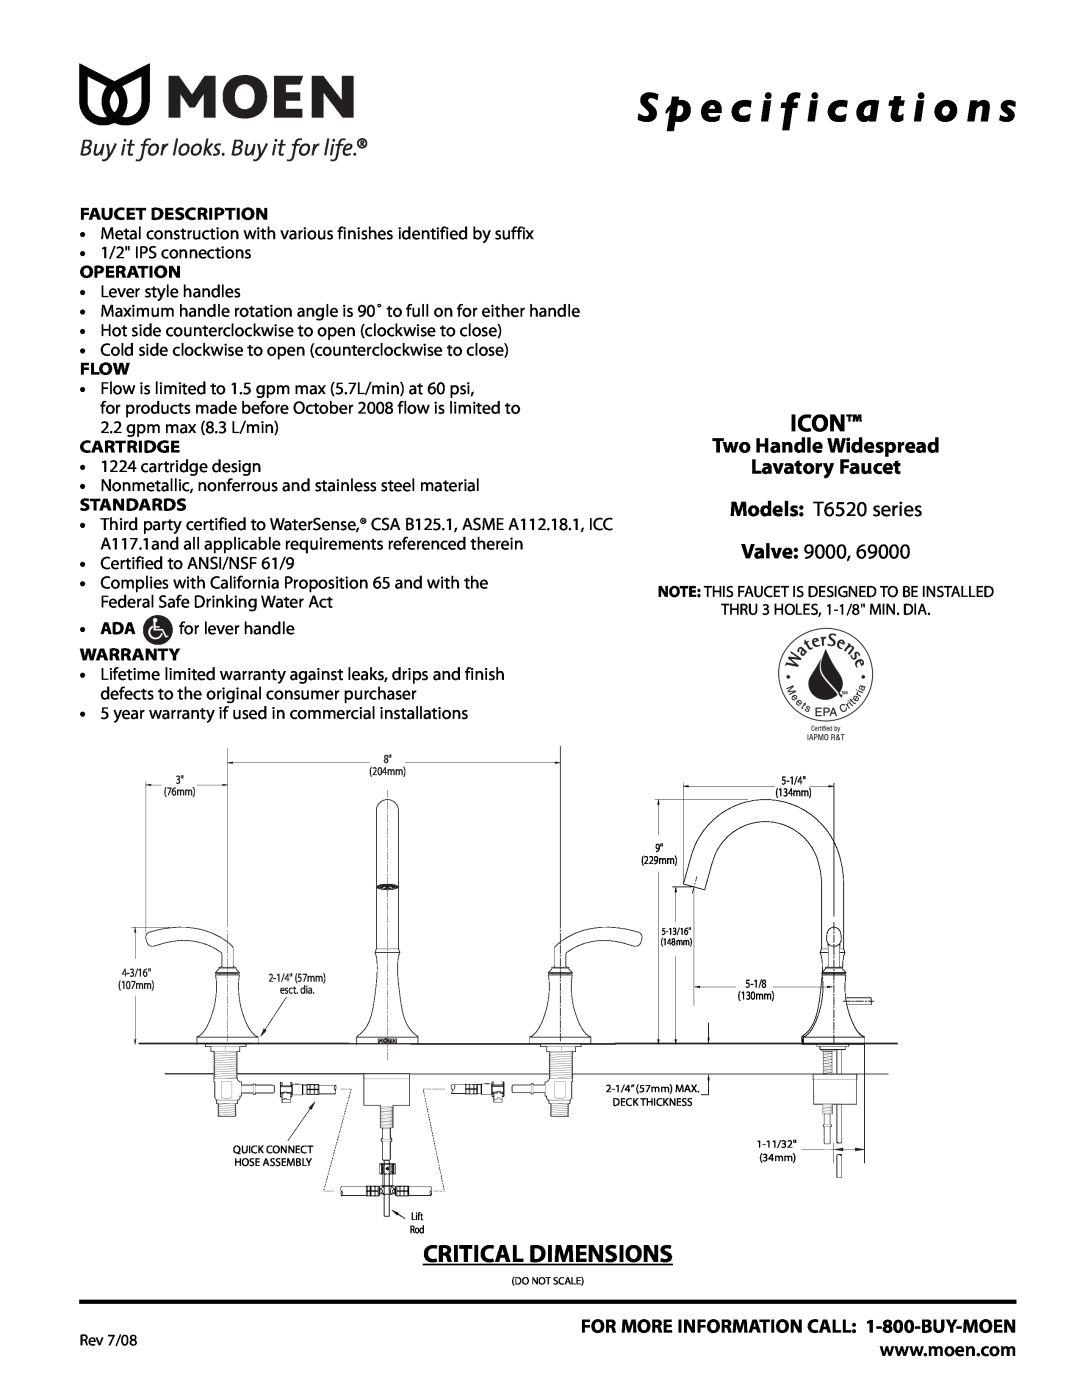 Moen T6520 Series specifications S p e c i f i c a t i o n s, Icon, Critical Dimensions, Models T6520 series Valve 9000 